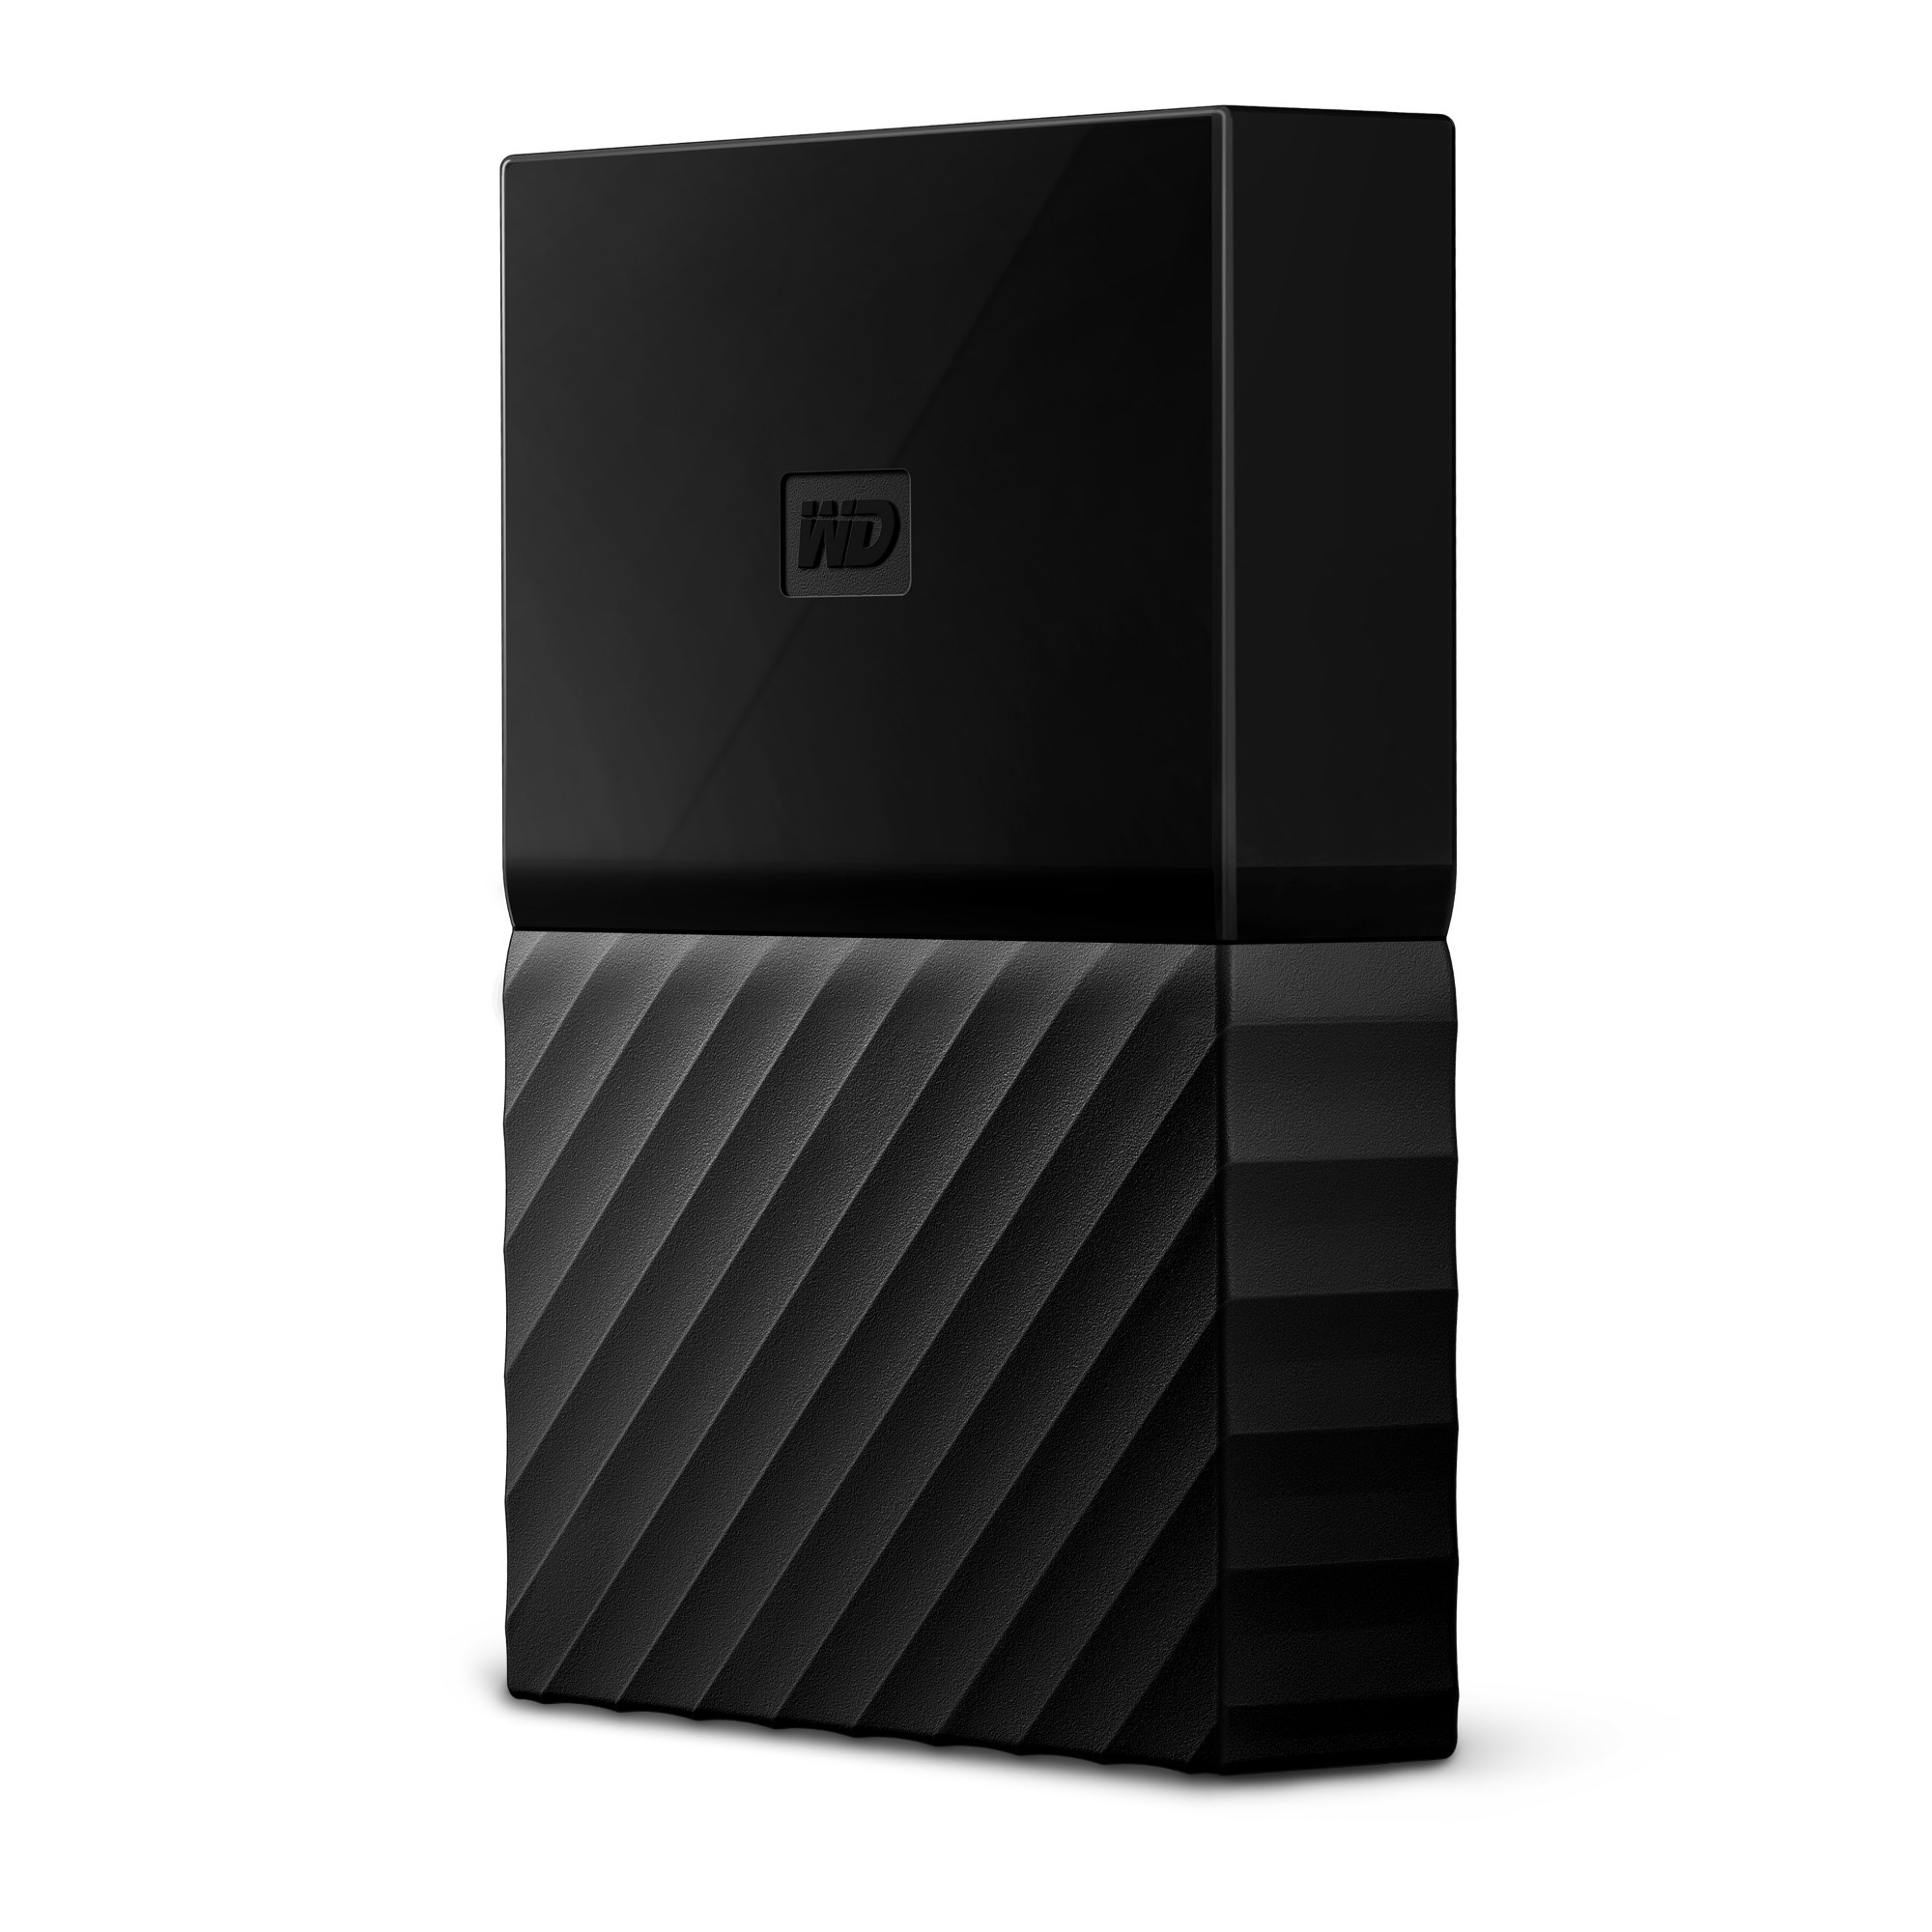 Wd For Mac Review